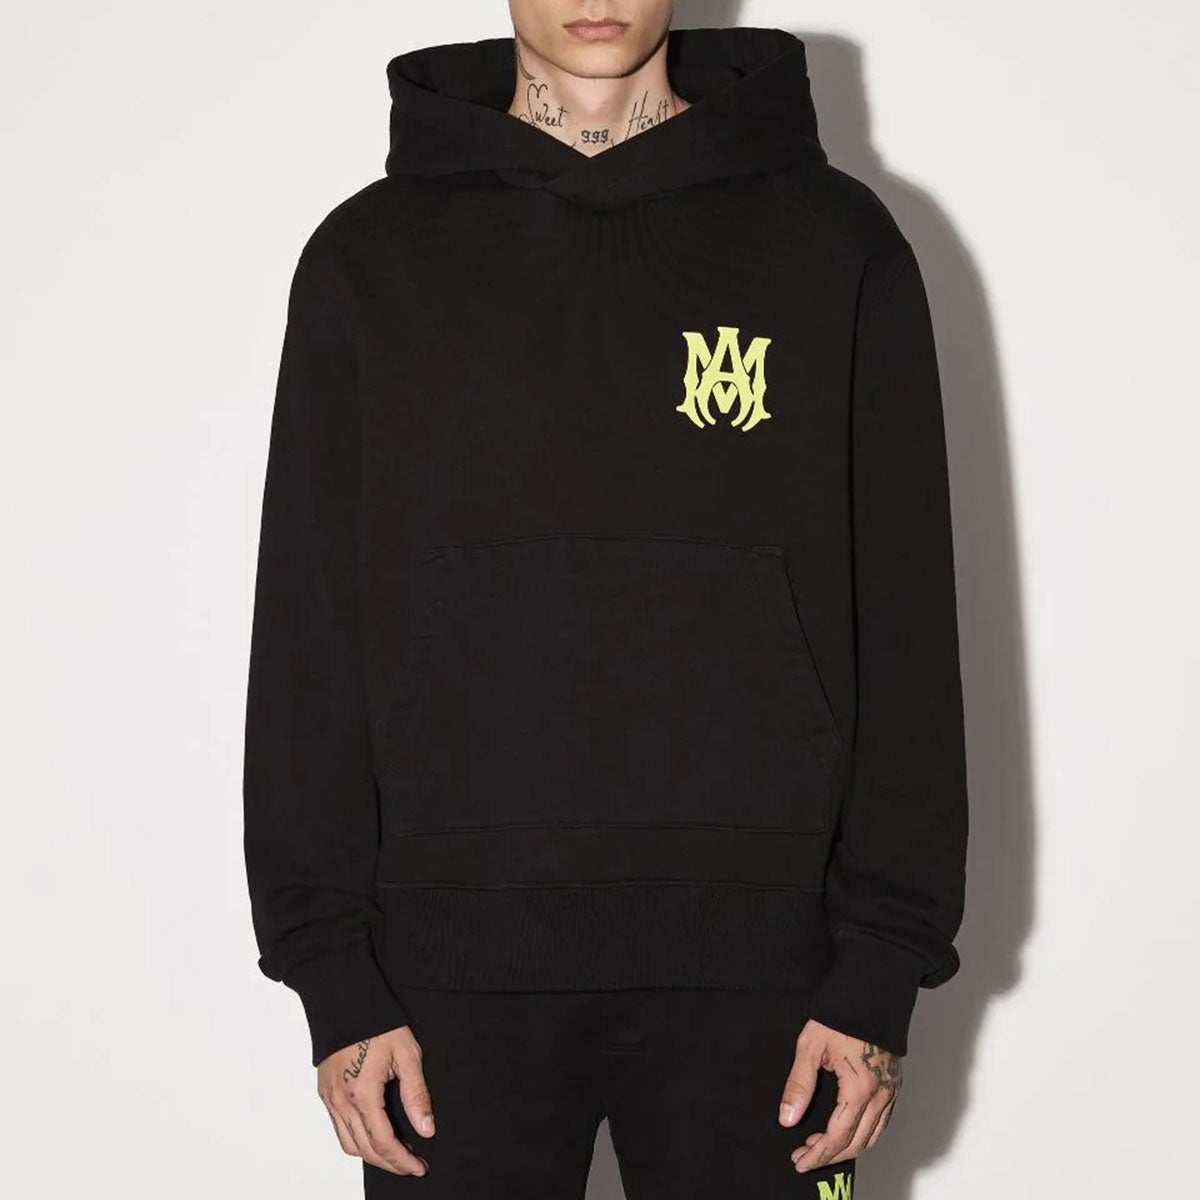 MA LOGO HOODIE - Why are you here?